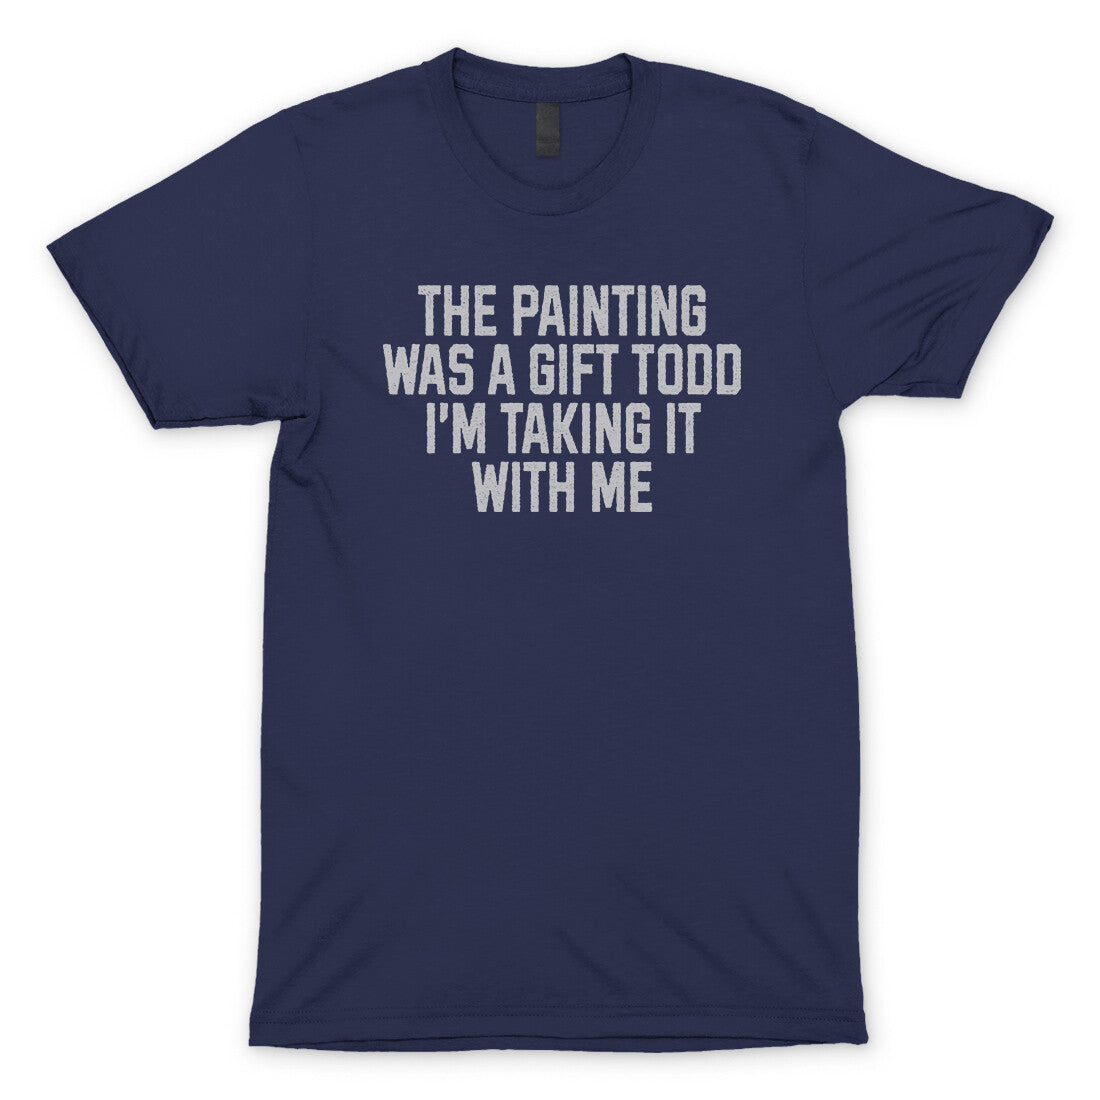 The Painting was a Gift Todd I'm Taking it With Me in Navy Color